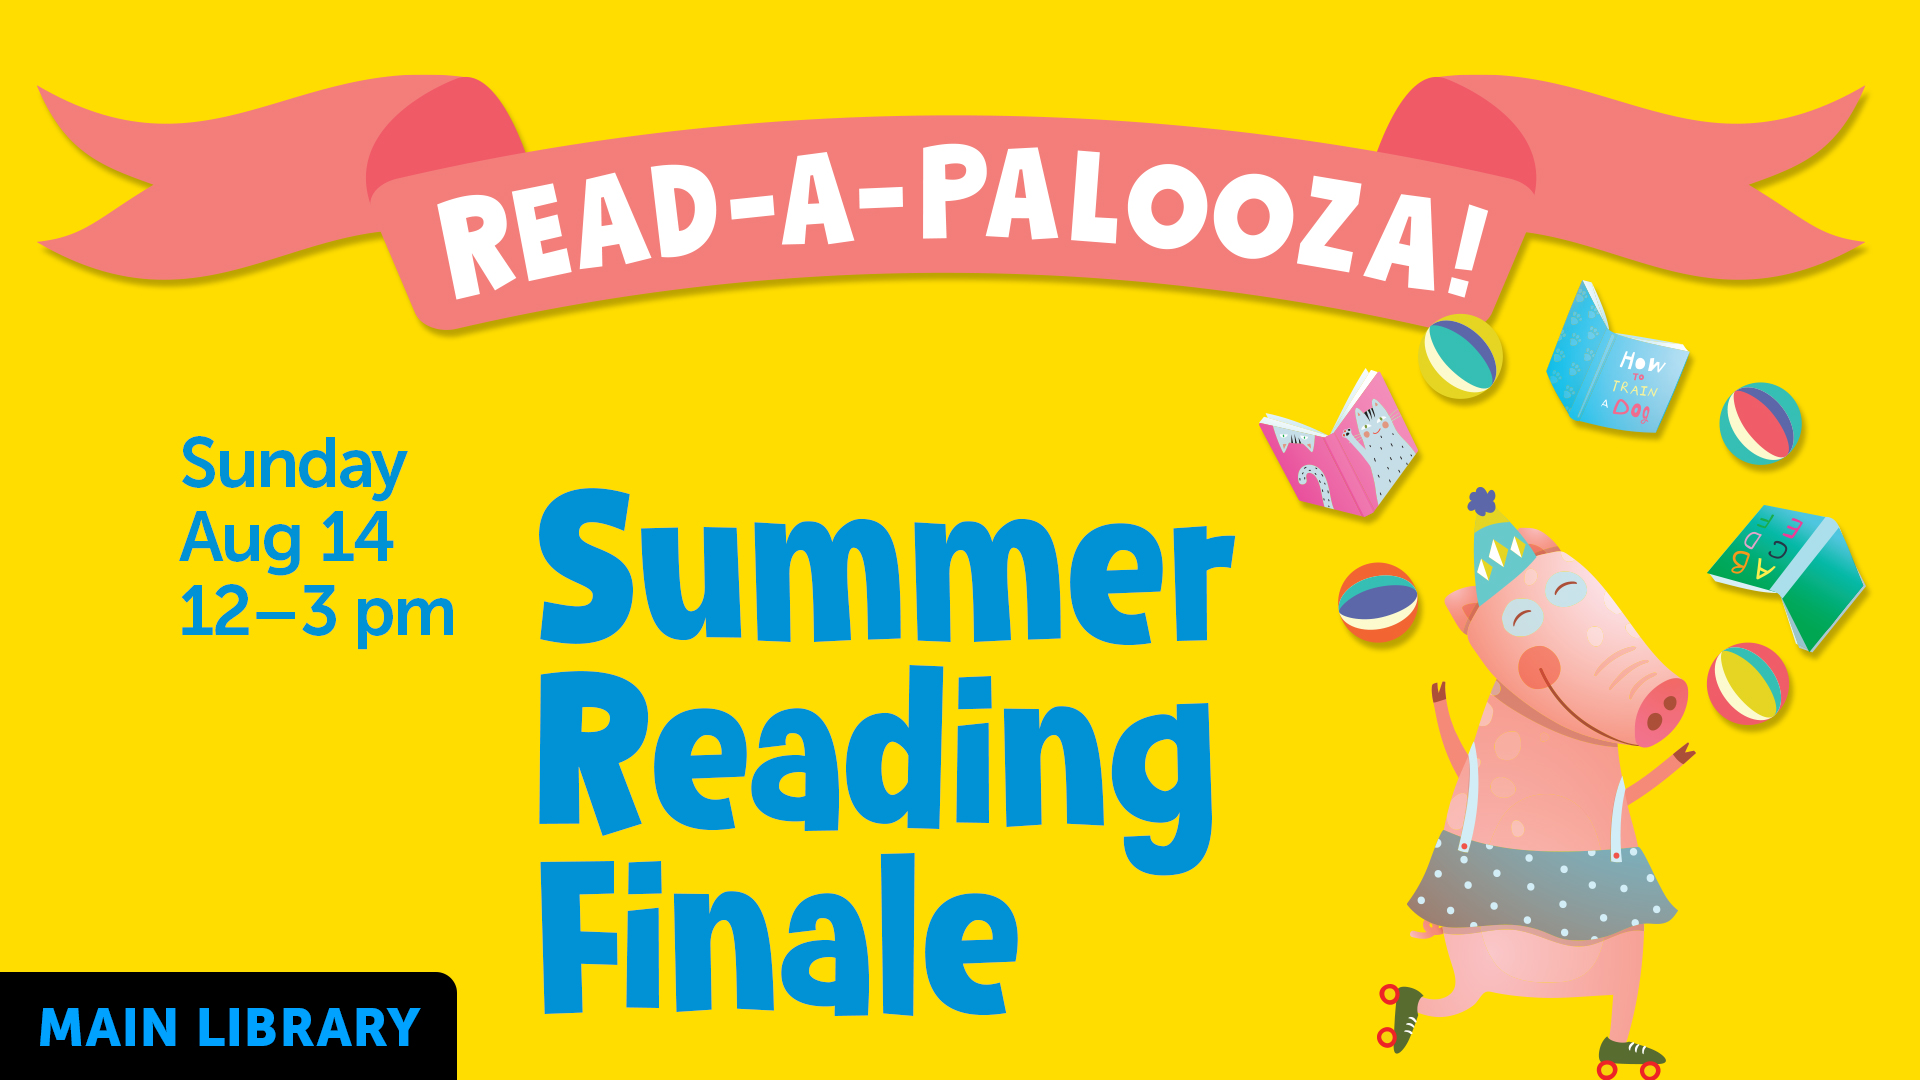 Image for Read-a-palooza! Summer Reading Finale